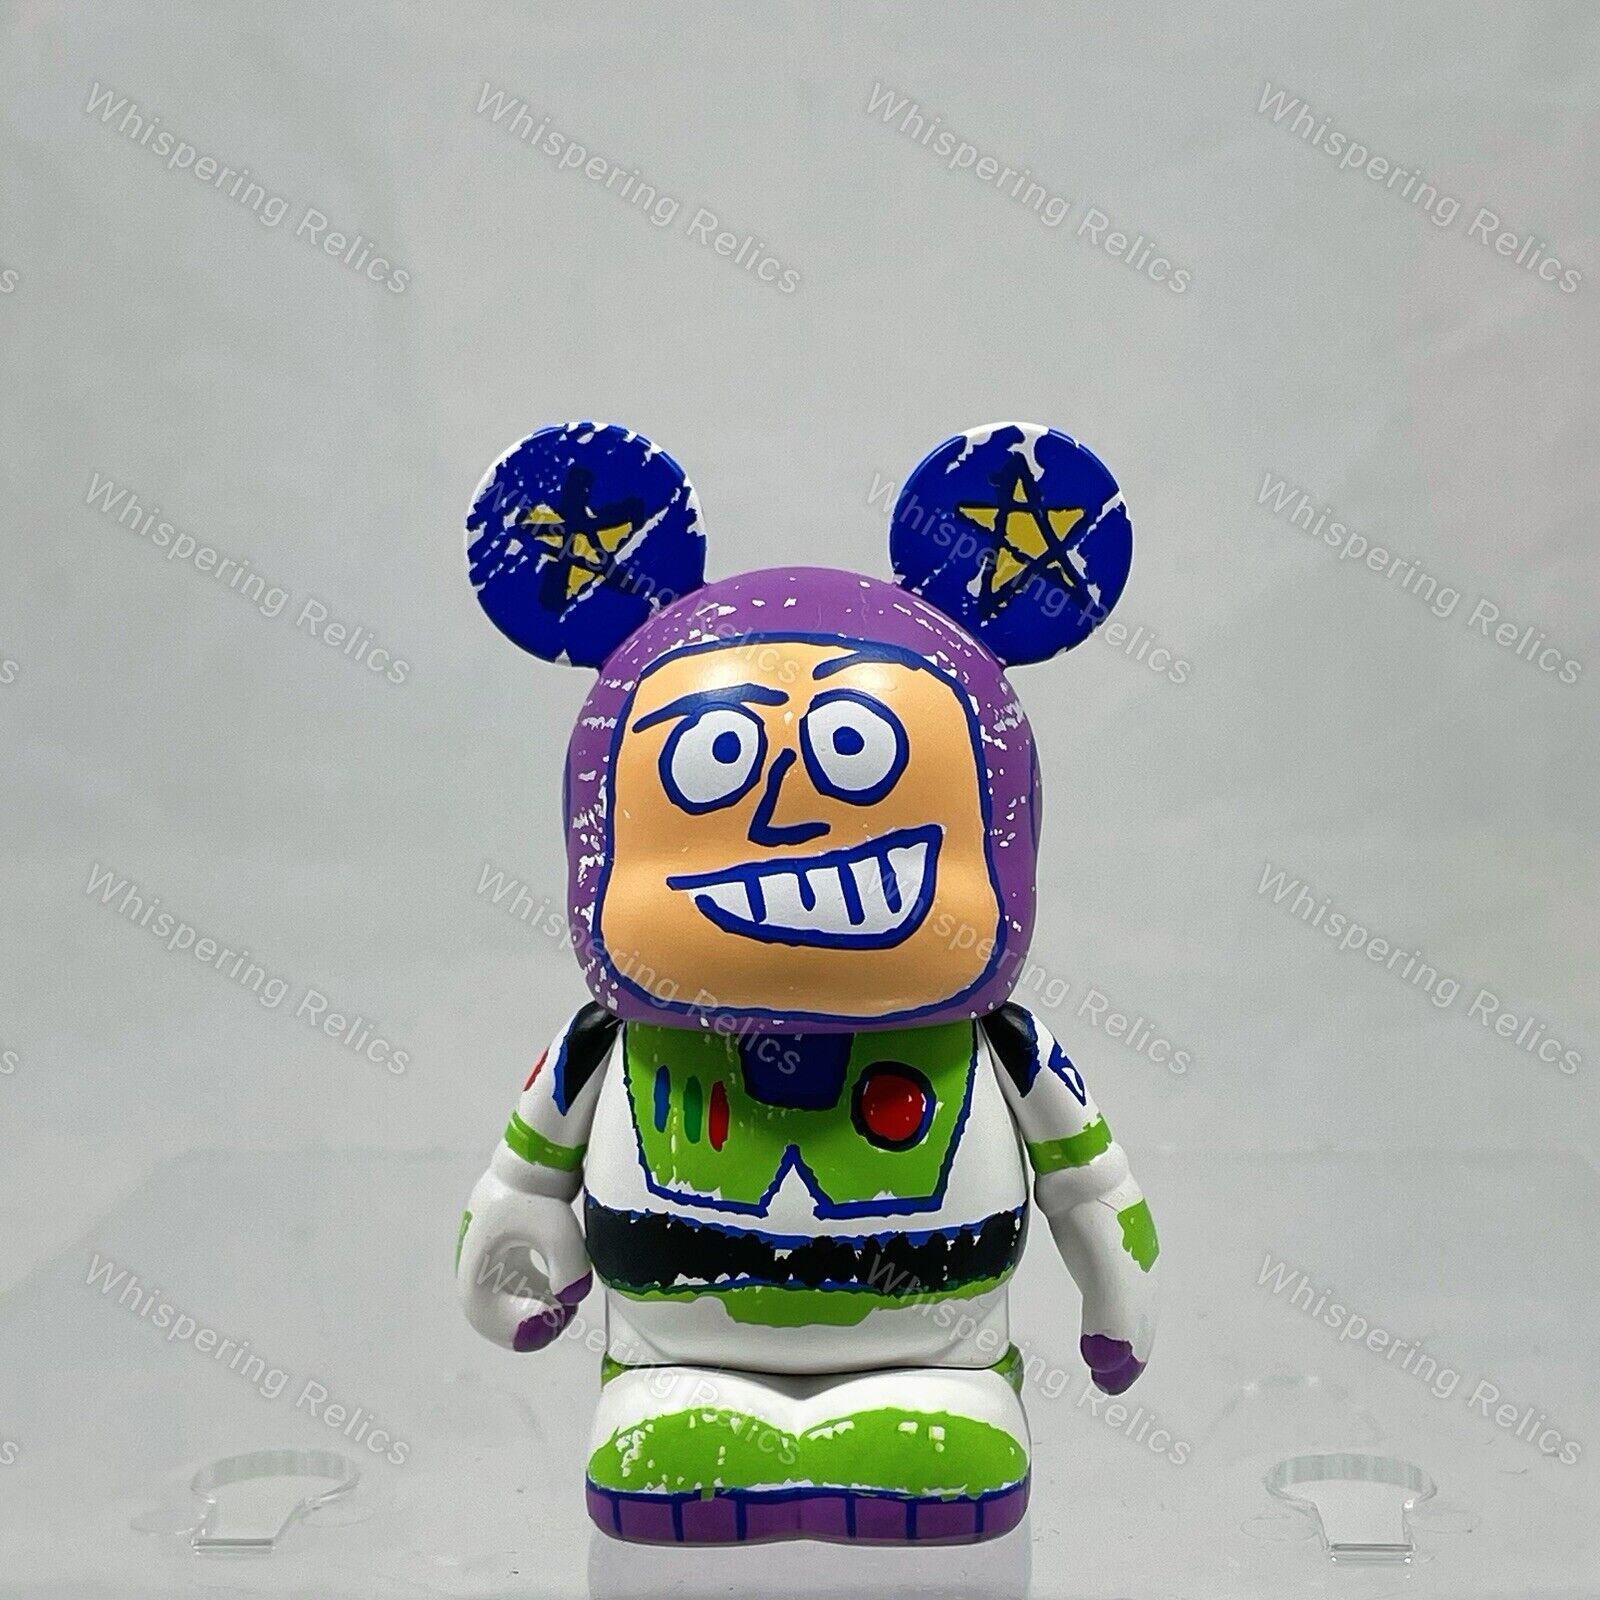 Buzz Lightyear Vinylmation Figure | Toy Story Mania Series | Signed by Andy